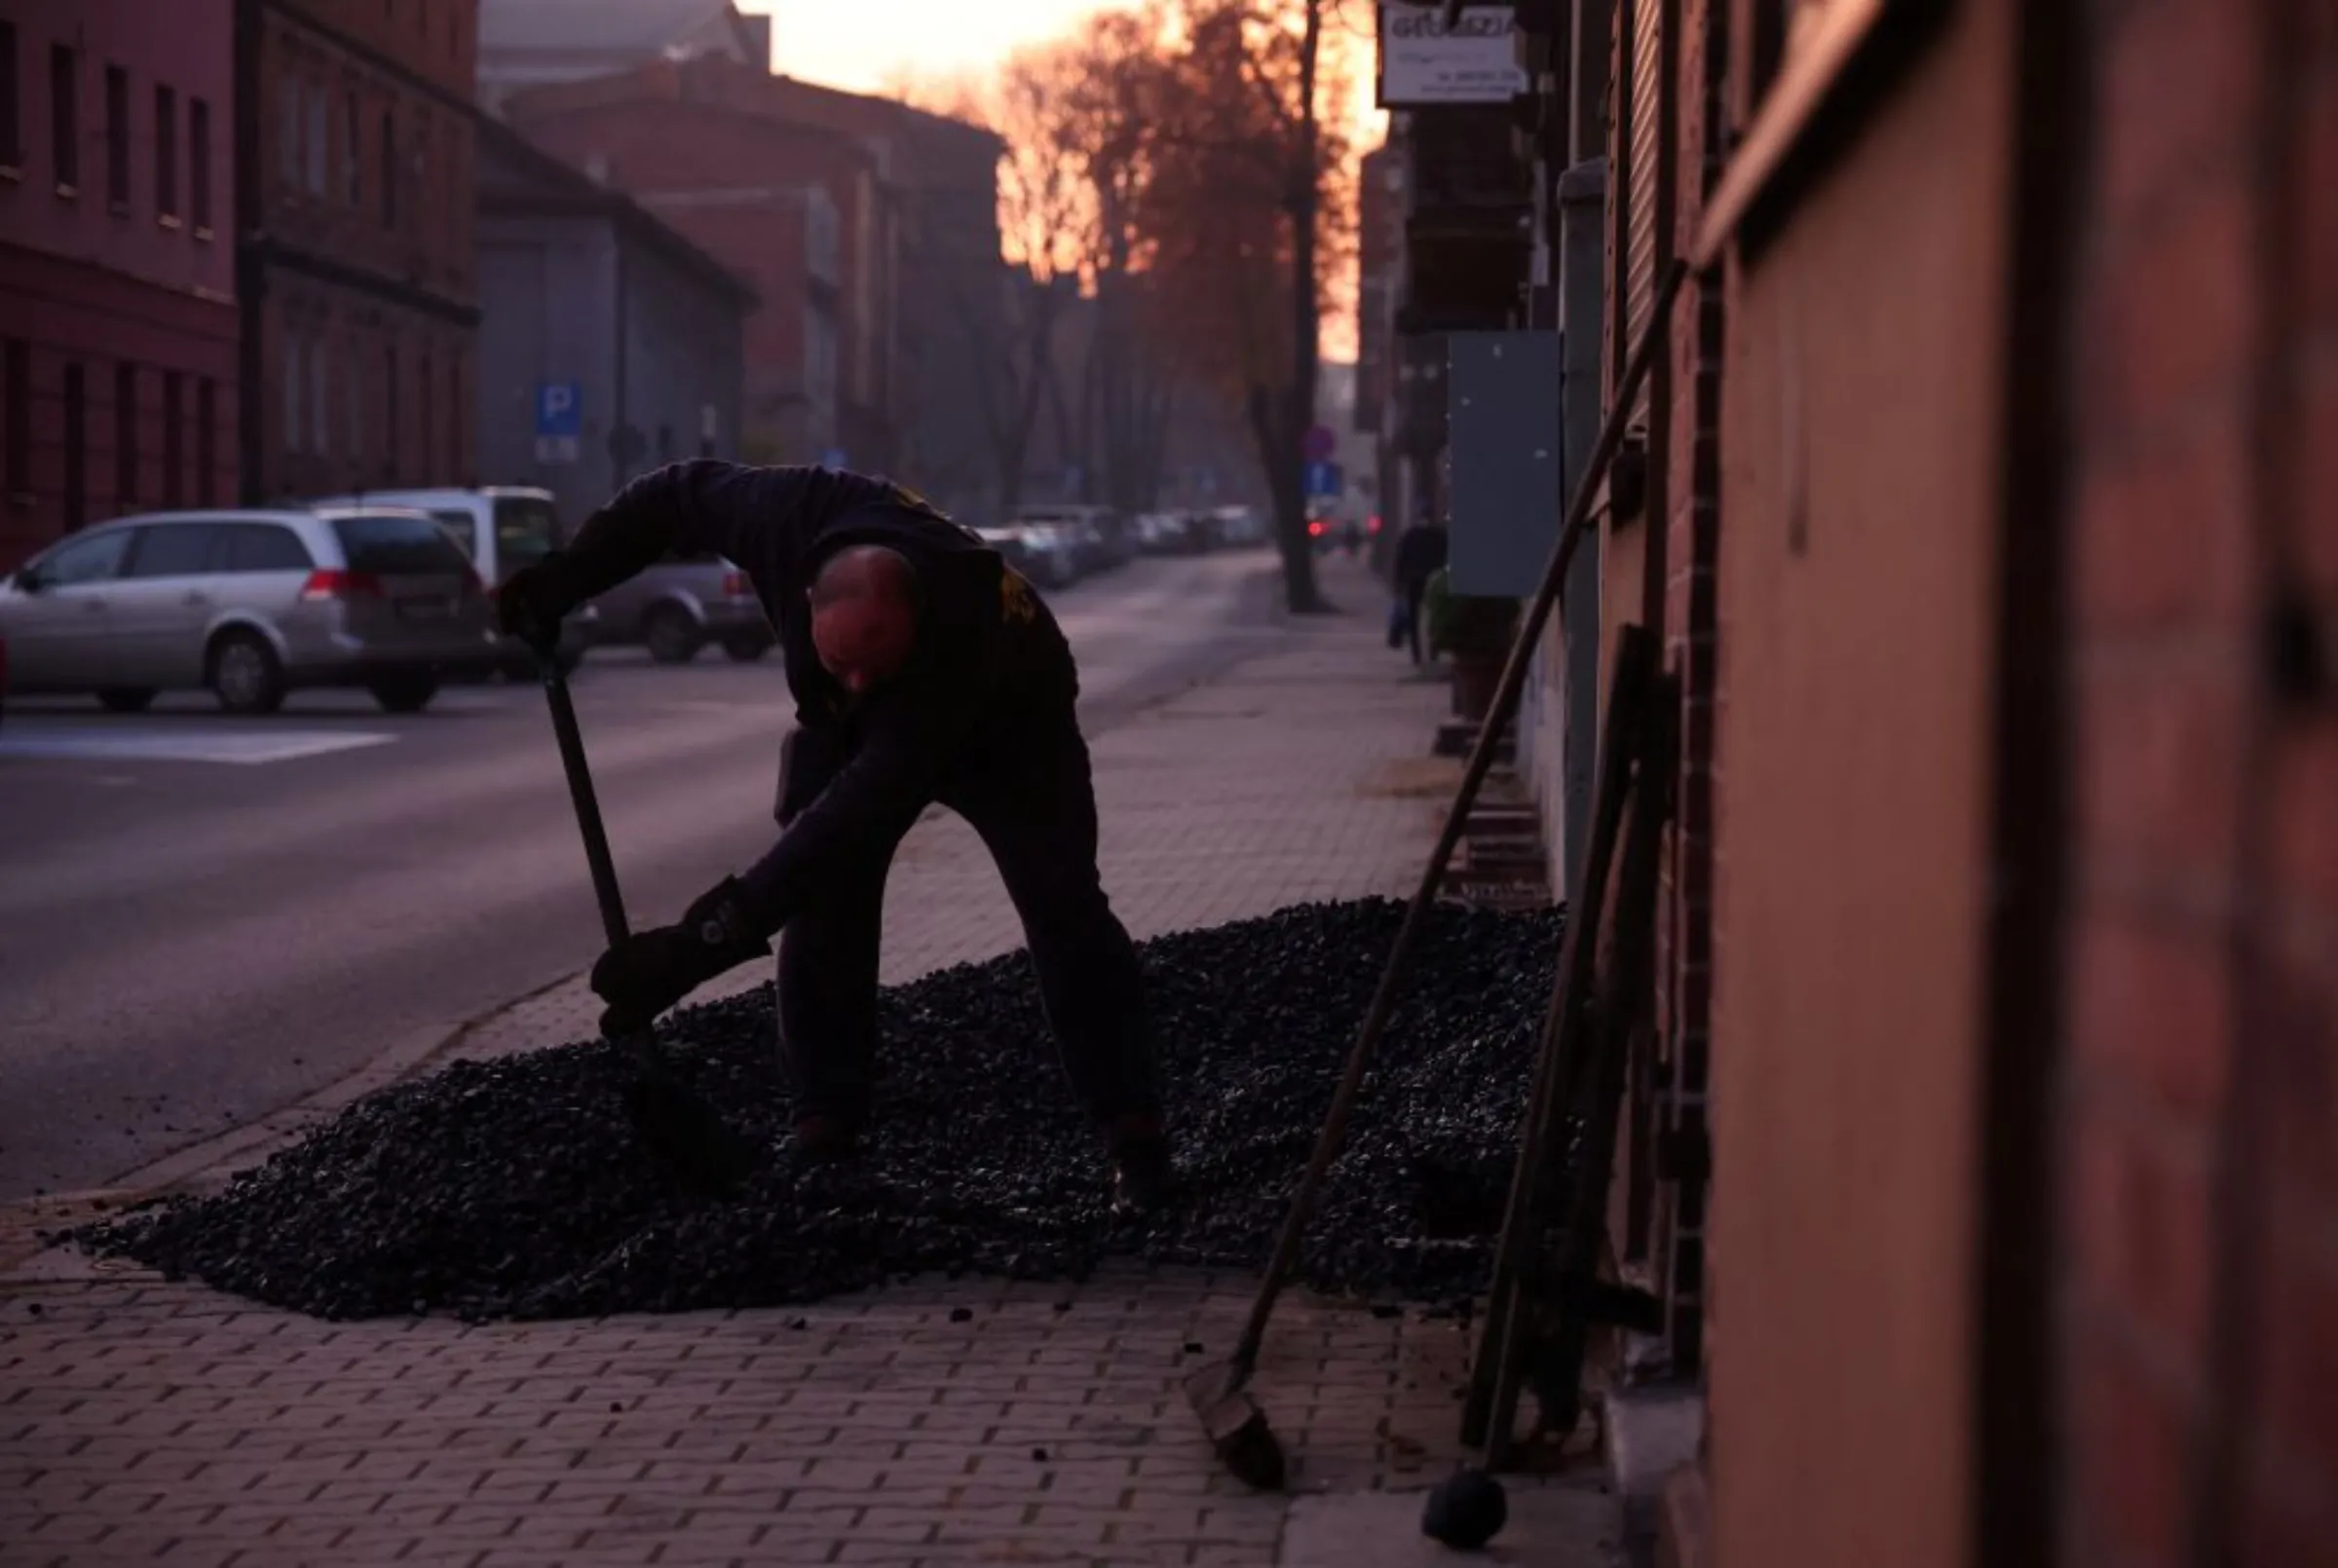 A man shovels coal into the basement of a house in Piekary Slaskie, Poland October 27, 2022. REUTERS/Kacper Pempel